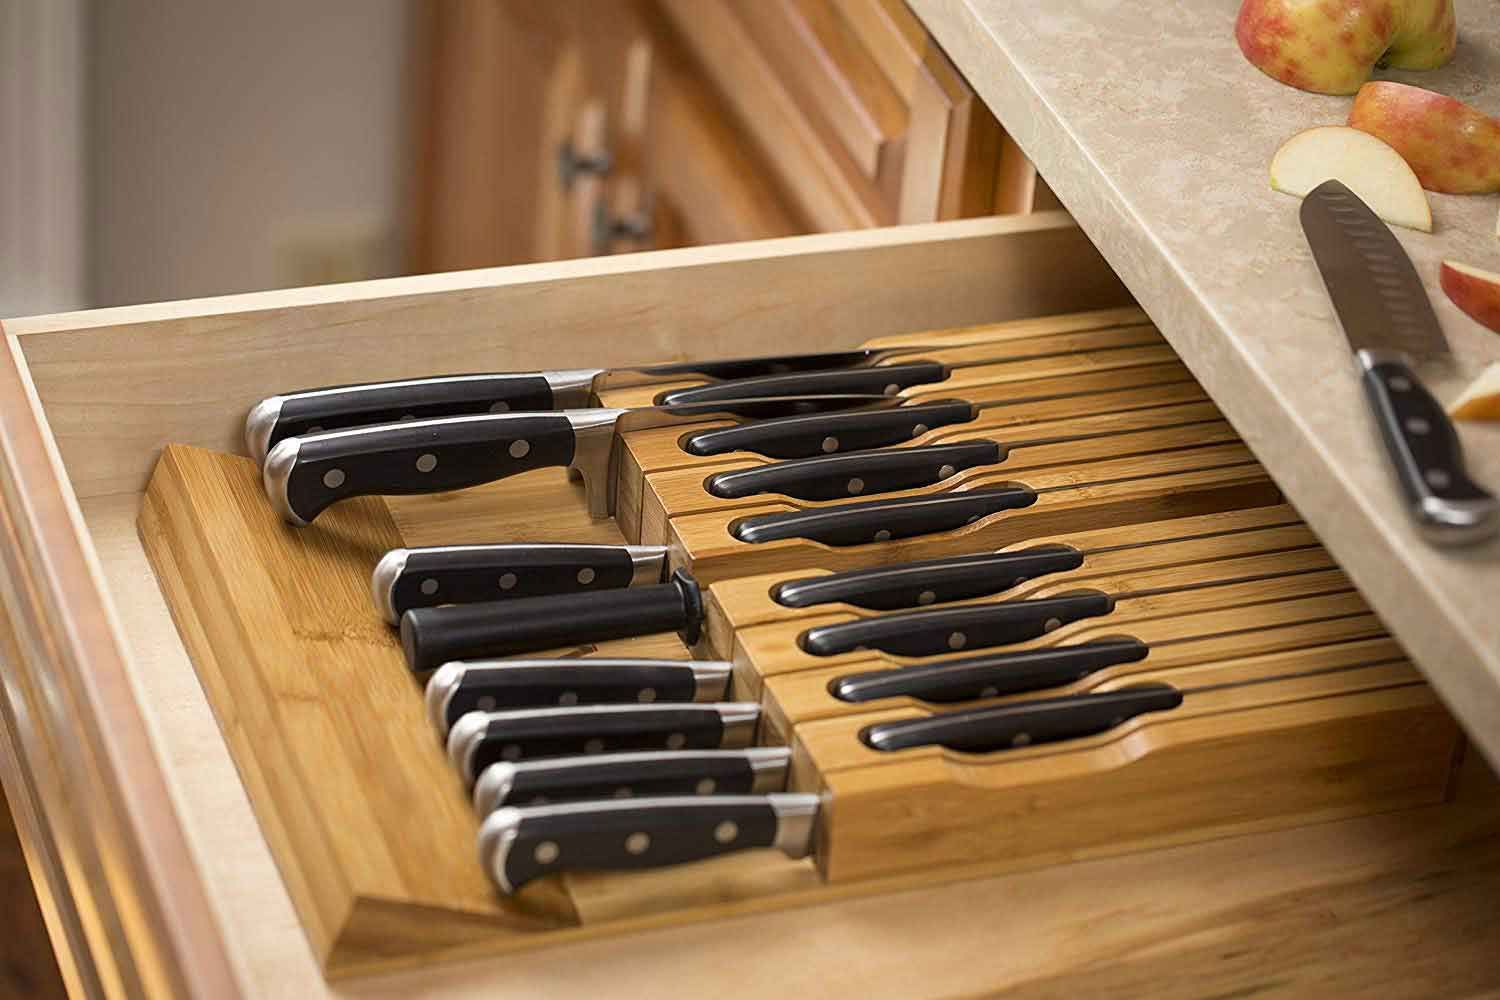 How To Store Knives In A Drawer